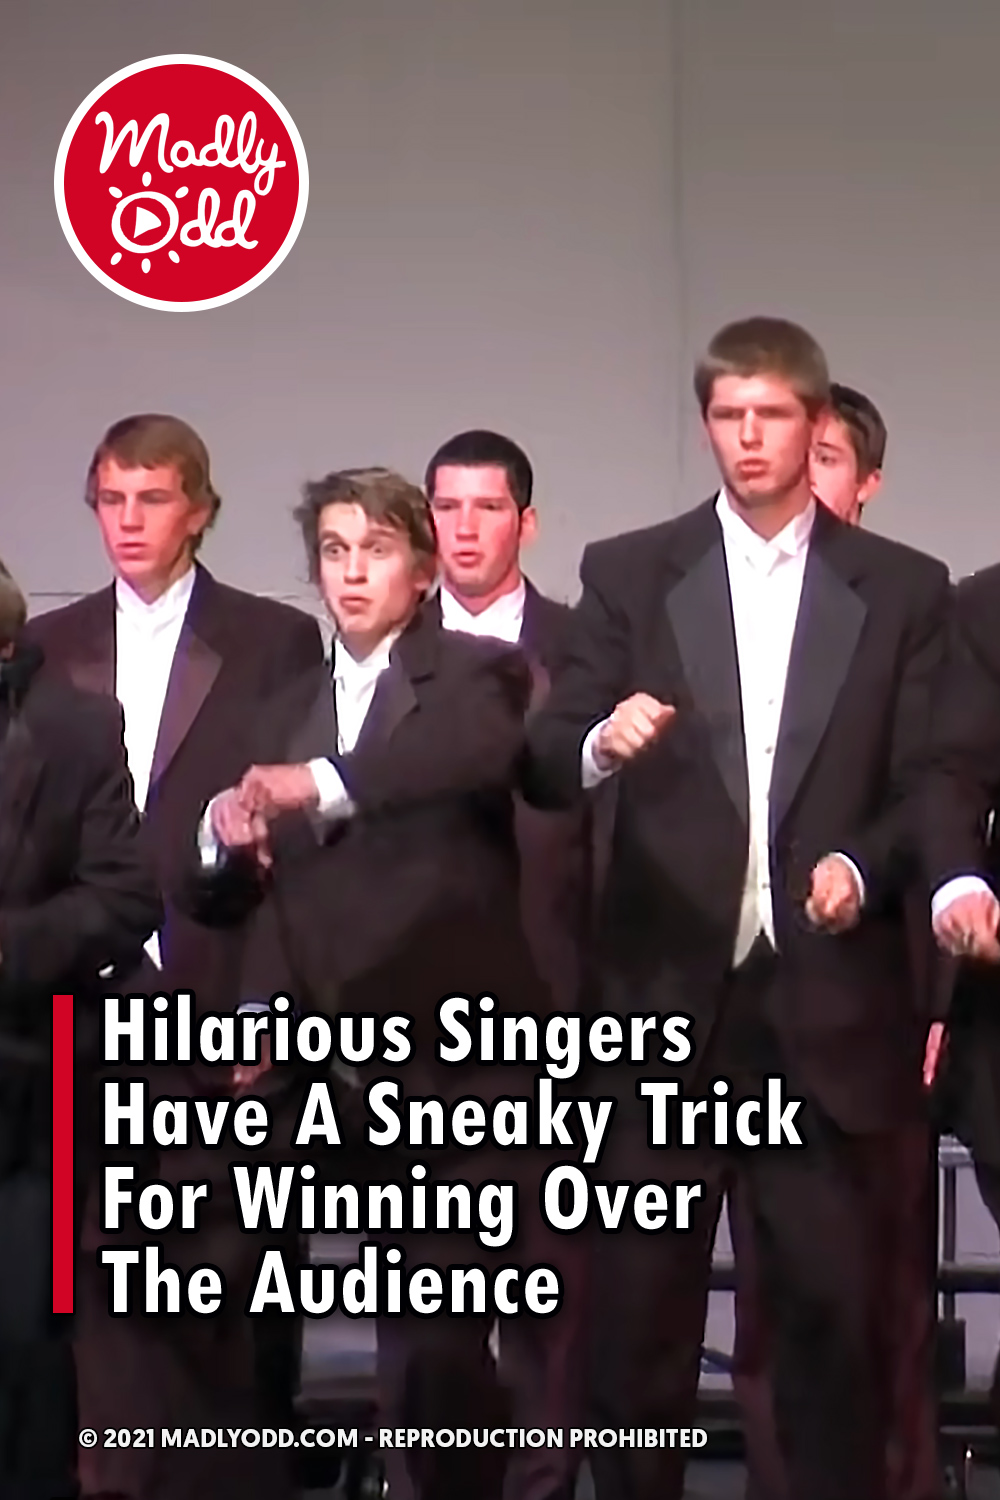 Hilarious Singers Have A Sneaky Trick For Winning Over The Audience